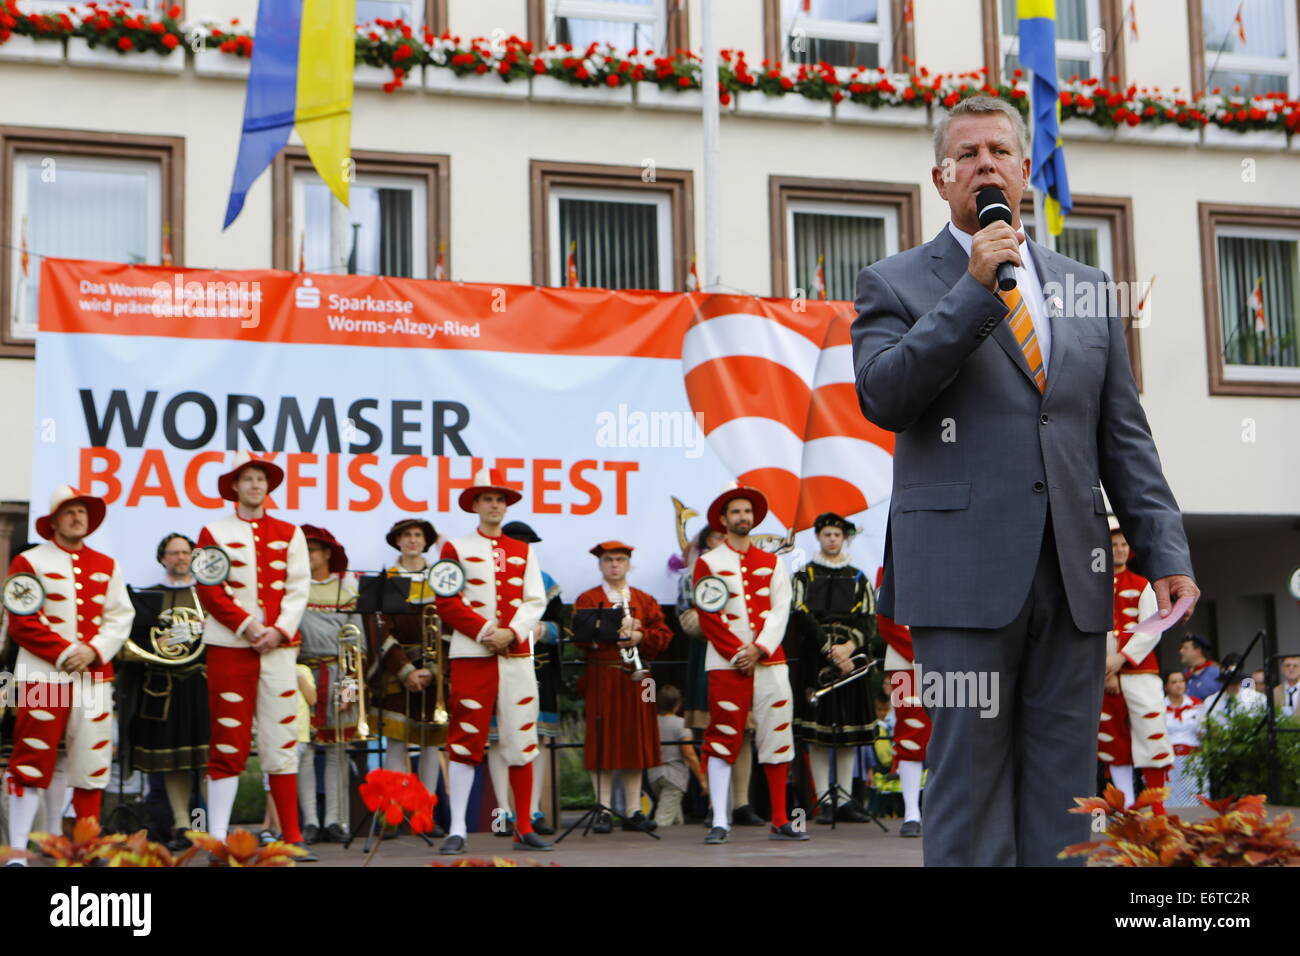 Worms, Germany. 30th August 2014. The Lord Mayor of Worms, Michael Kissel (SPD), addresses the opening ceremony of the Backfischfest 2014. The largest wine fair along the Rhine, the Backfischfest, started in Worms with the traditional handing over of power from the Lord Mayor to the mayor of the fishermenÕs lea. The ceremony included dances and music. Stock Photo